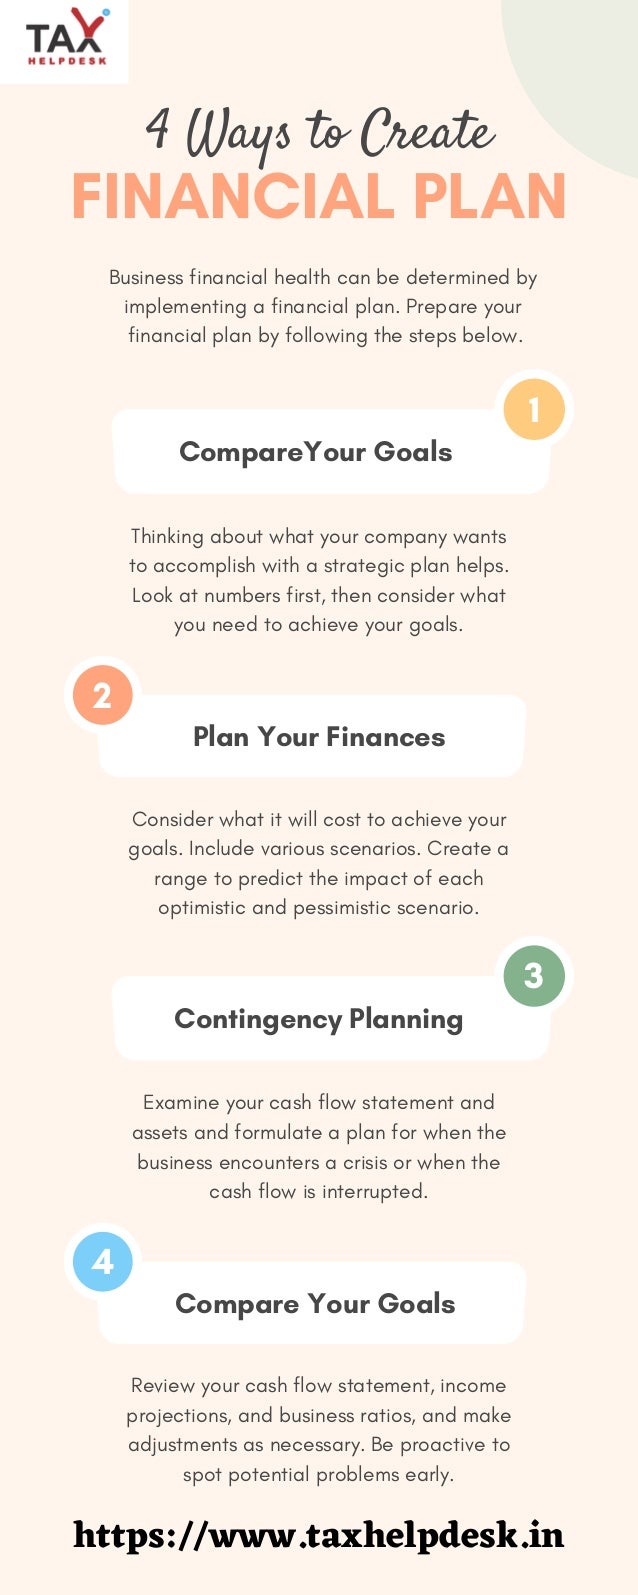 FINANCIAL PLAN
4 Ways to Create
Business financial health can be determined by
implementing a financial plan. Prepare your
financial plan by following the steps below.
Thinking about what your company wants
to accomplish with a strategic plan helps.
Look at numbers first, then consider what
you need to achieve your goals.
1
CompareYour Goals
Consider what it will cost to achieve your
goals. Include various scenarios. Create a
range to predict the impact of each
optimistic and pessimistic scenario.
2
Plan Your Finances
Examine your cash flow statement and
assets and formulate a plan for when the
business encounters a crisis or when the
cash flow is interrupted.
3
Contingency Planning
Review your cash flow statement, income
projections, and business ratios, and make
adjustments as necessary. Be proactive to
spot potential problems early.
4
Compare Your Goals
https://www.taxhelpdesk.in
 